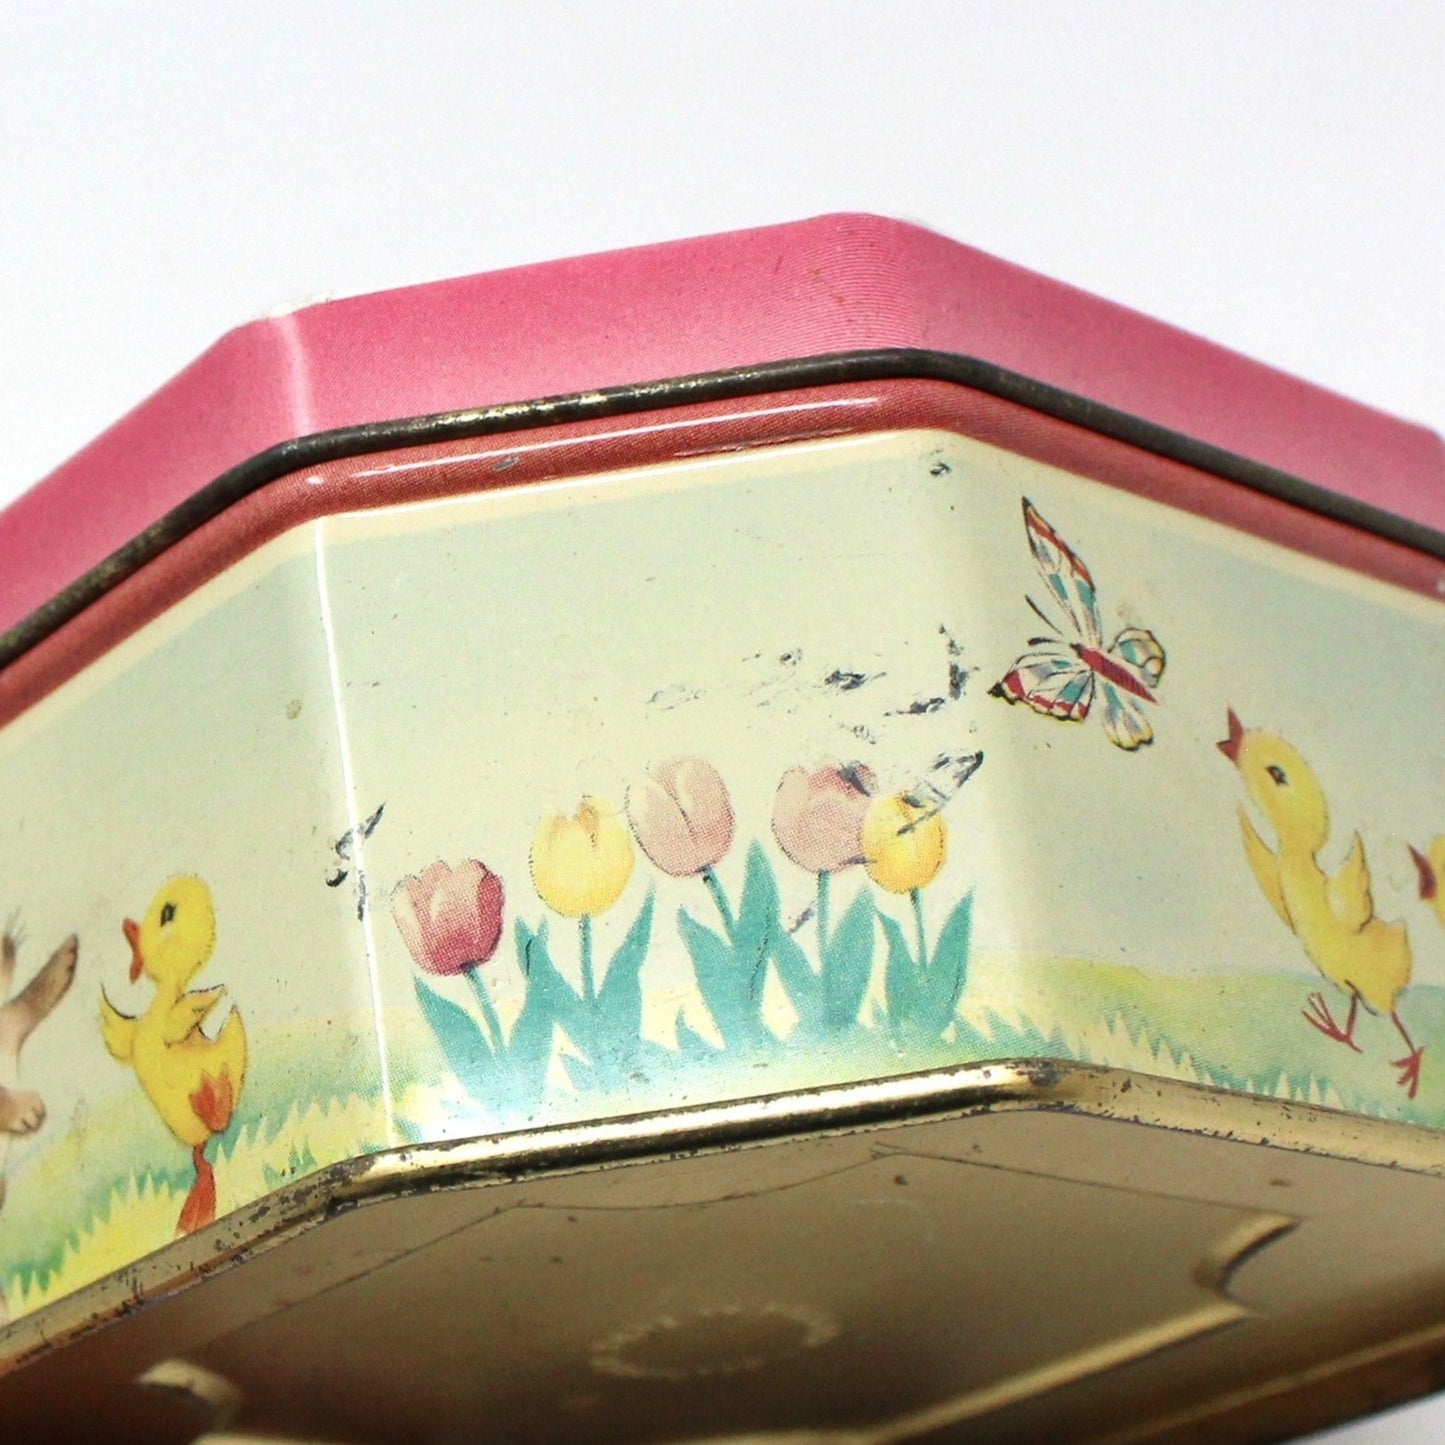 Gift Tin / Candy Tin, Bunny & Chicks with Easter Eggs, Vintage Holland